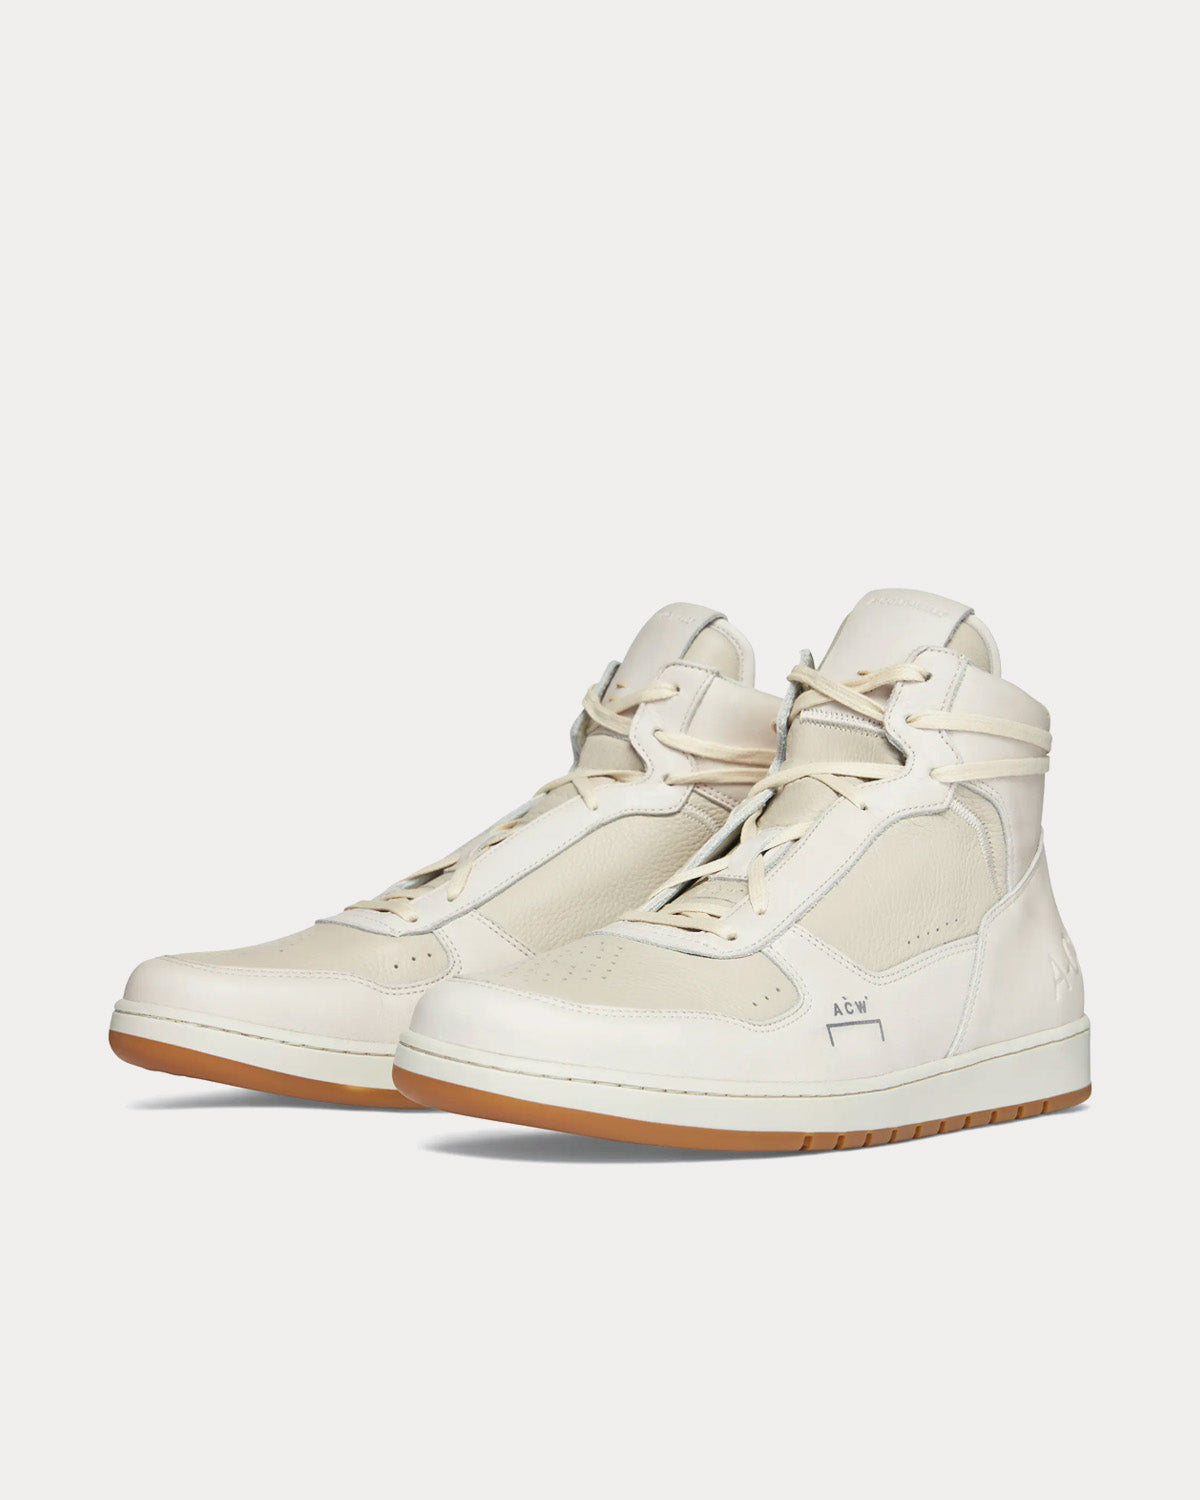 A-COLD-WALL* - Luol Leather Tan High Top Sneakers